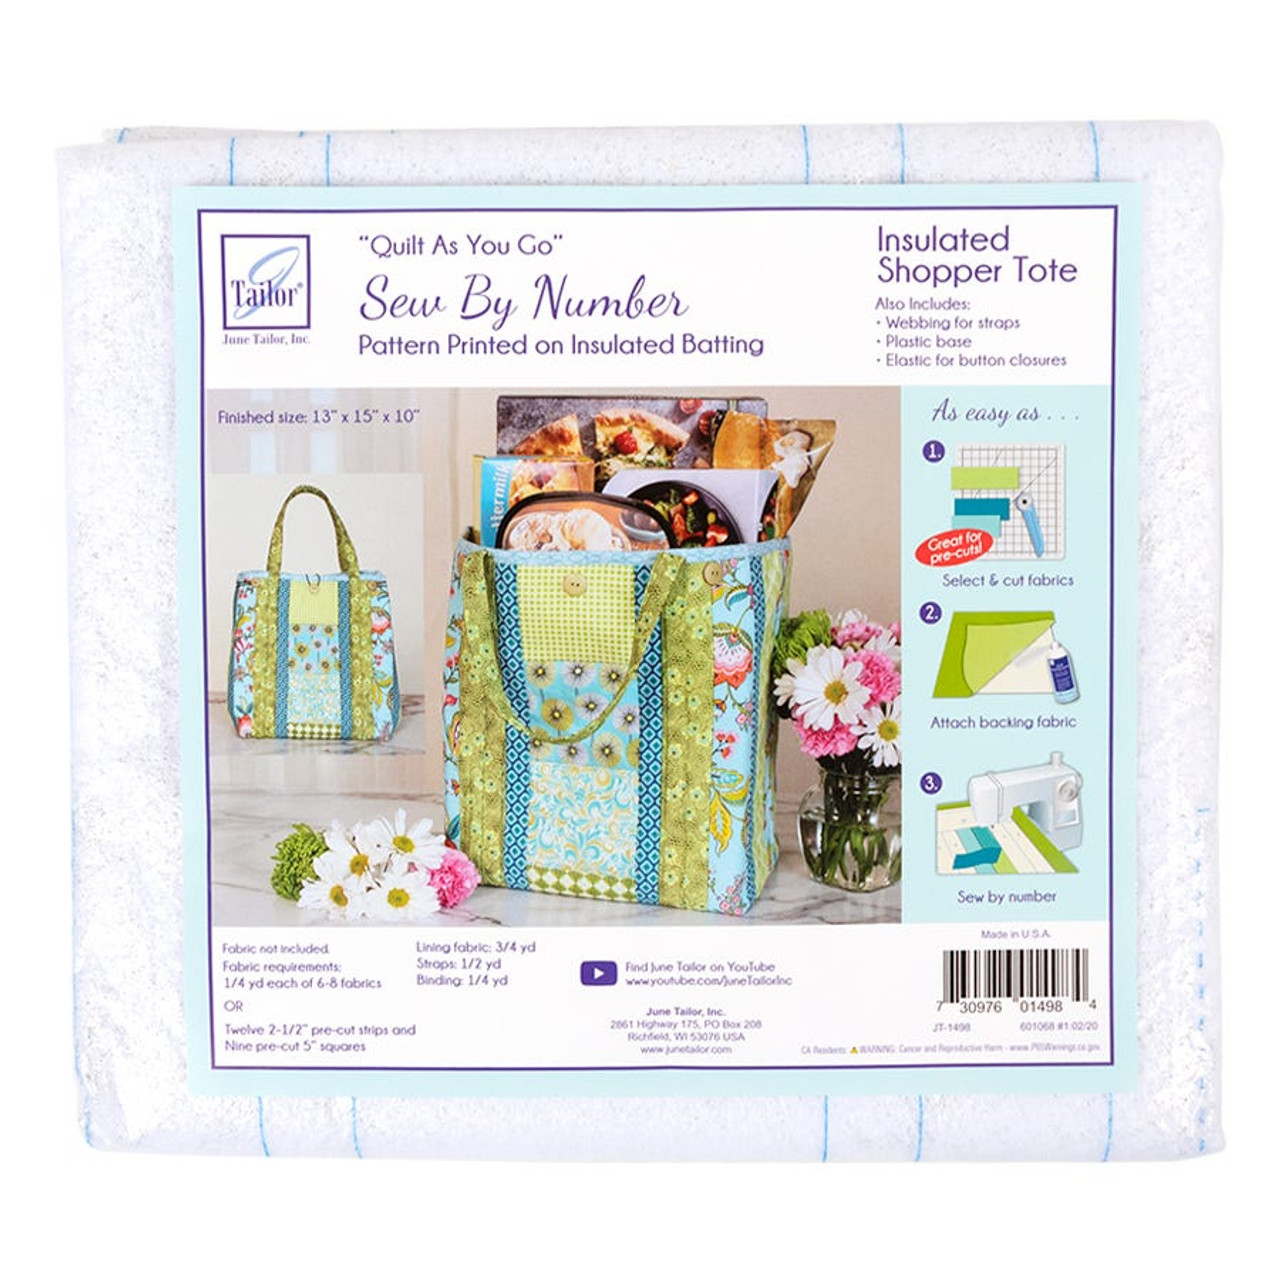 How to Make June Tailor Quilt As You Go Project Bags